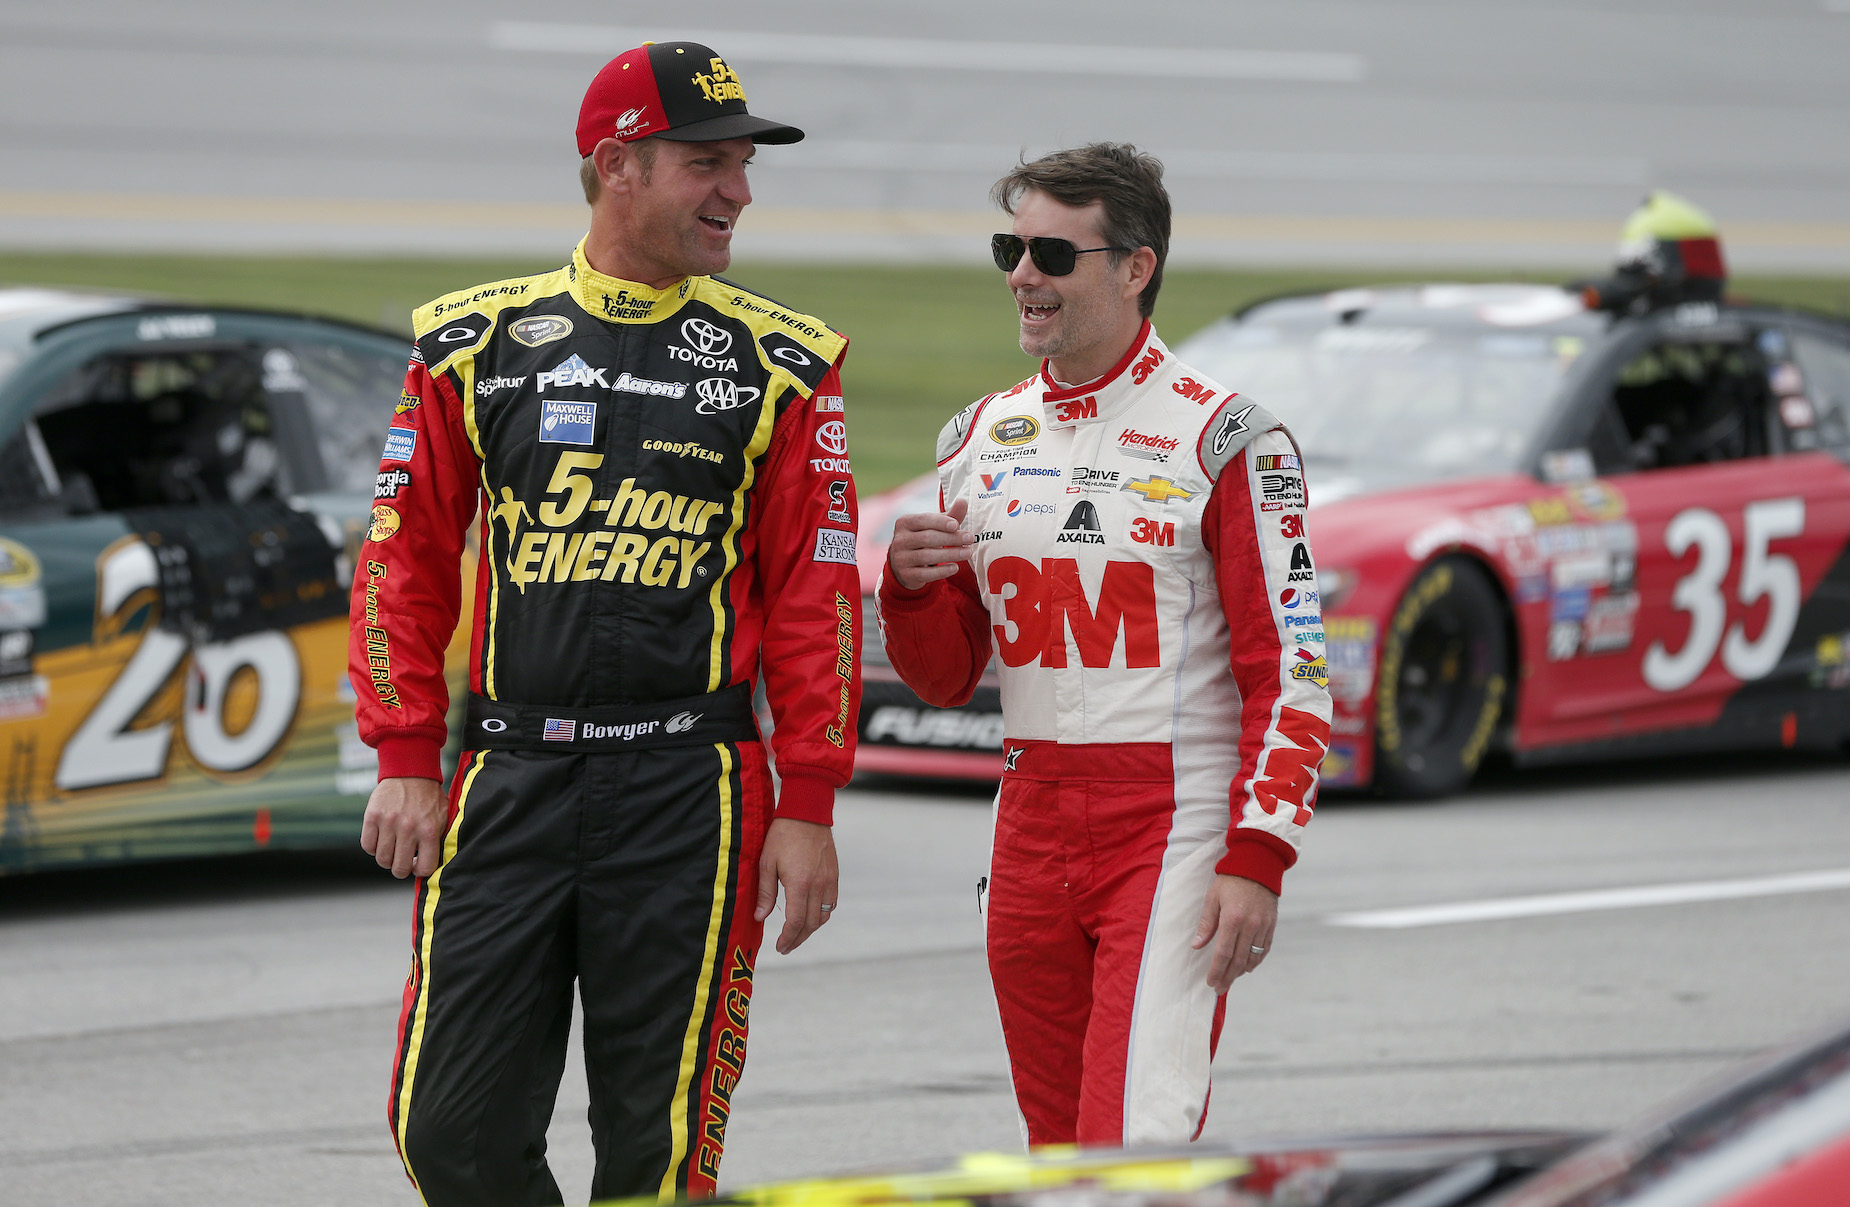 Does Jeff Gordon or Clint Bowyer have a larger net worth?